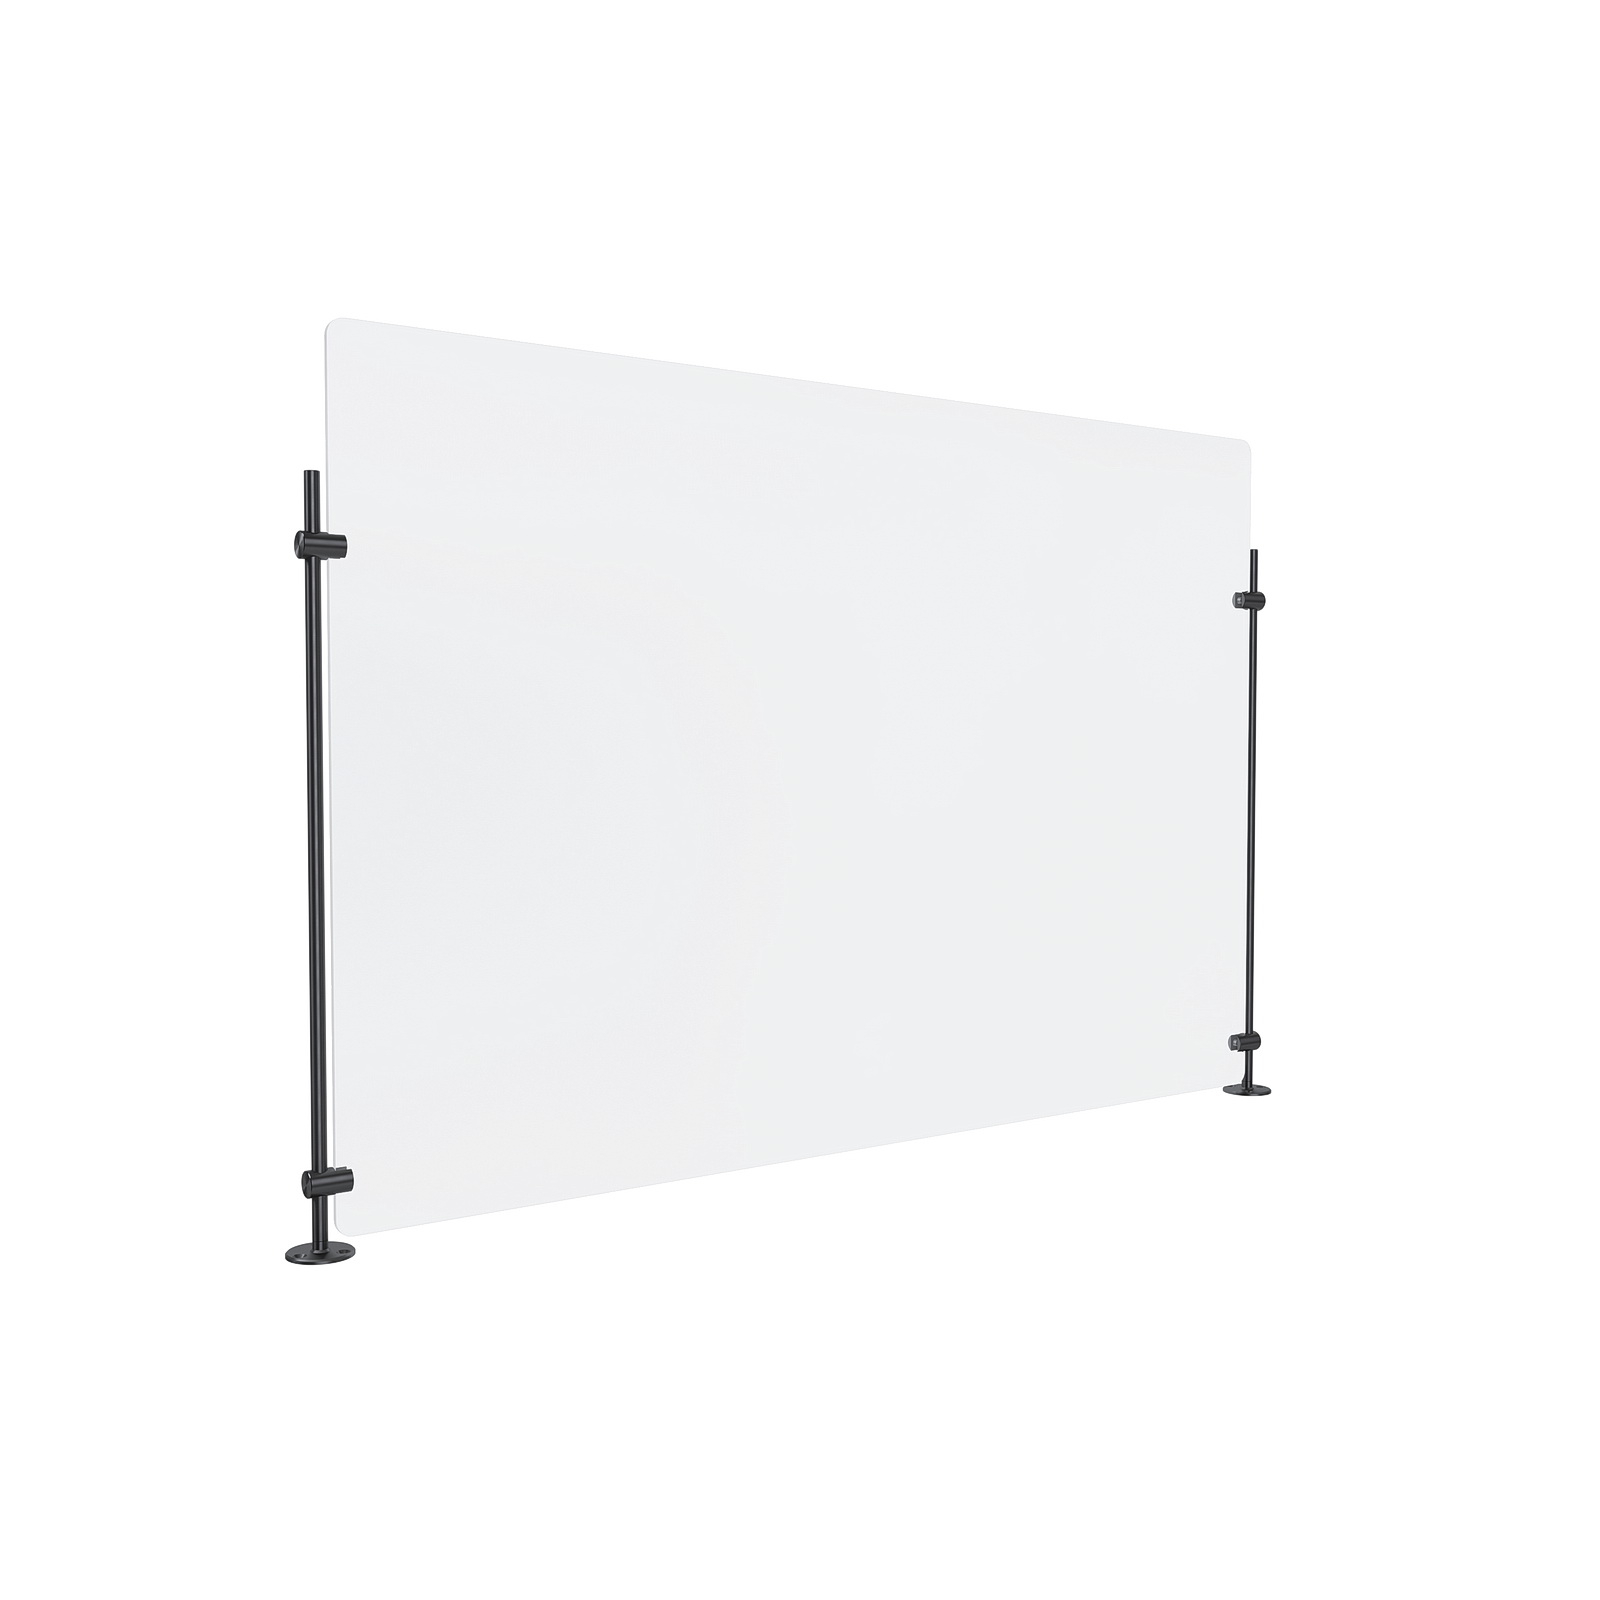 Clear Acrylic Sneeze Guard 35'' Wide x 23-1/2'' Tall, with (2) 20'' Tall x 3/8'' Diameter Black Anodized Aluminum Rods on the Side.